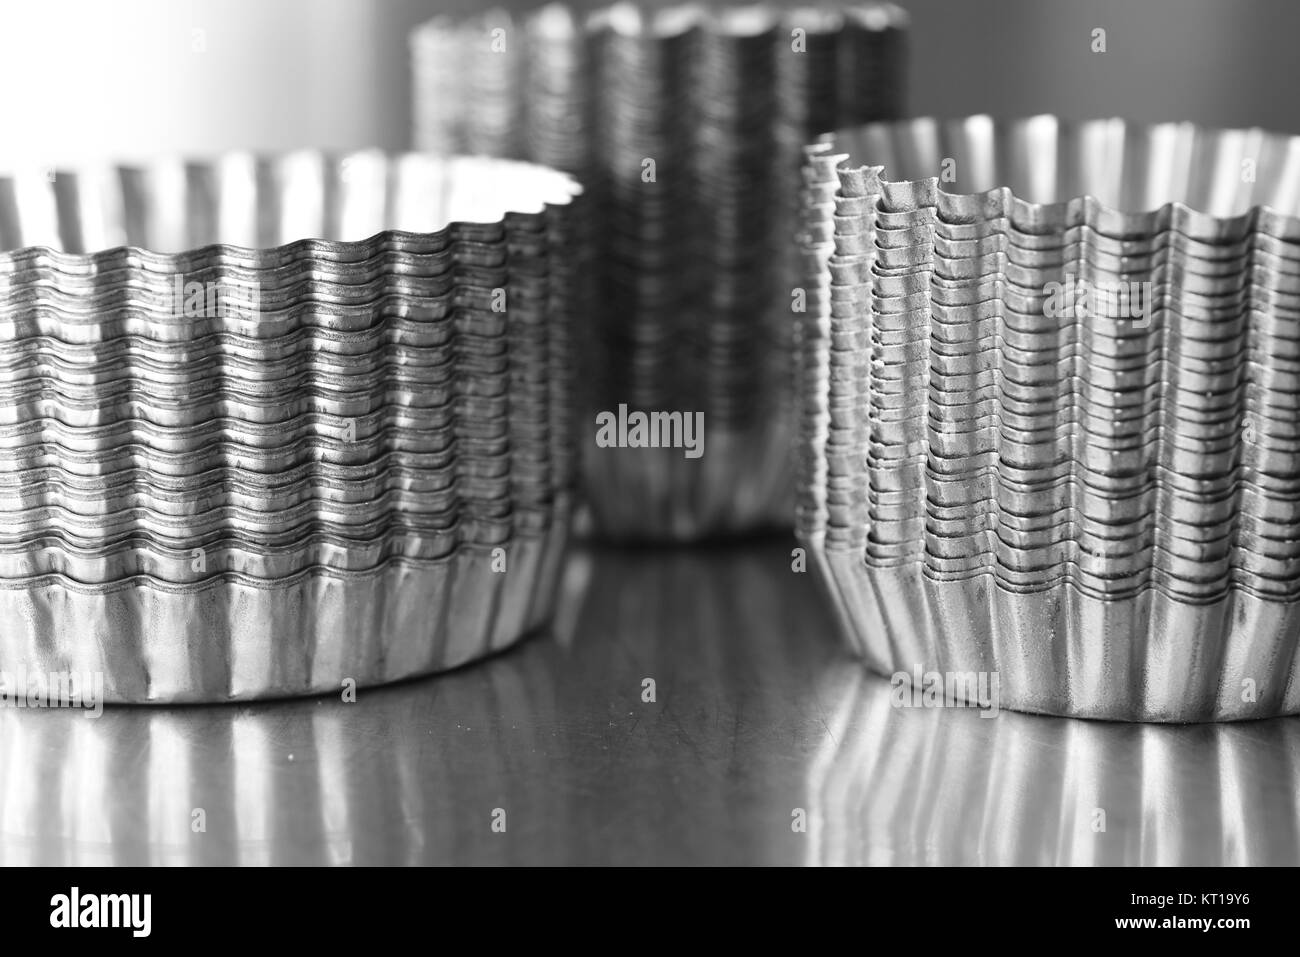 Stack of stainless steel pastry moulds Stock Photo